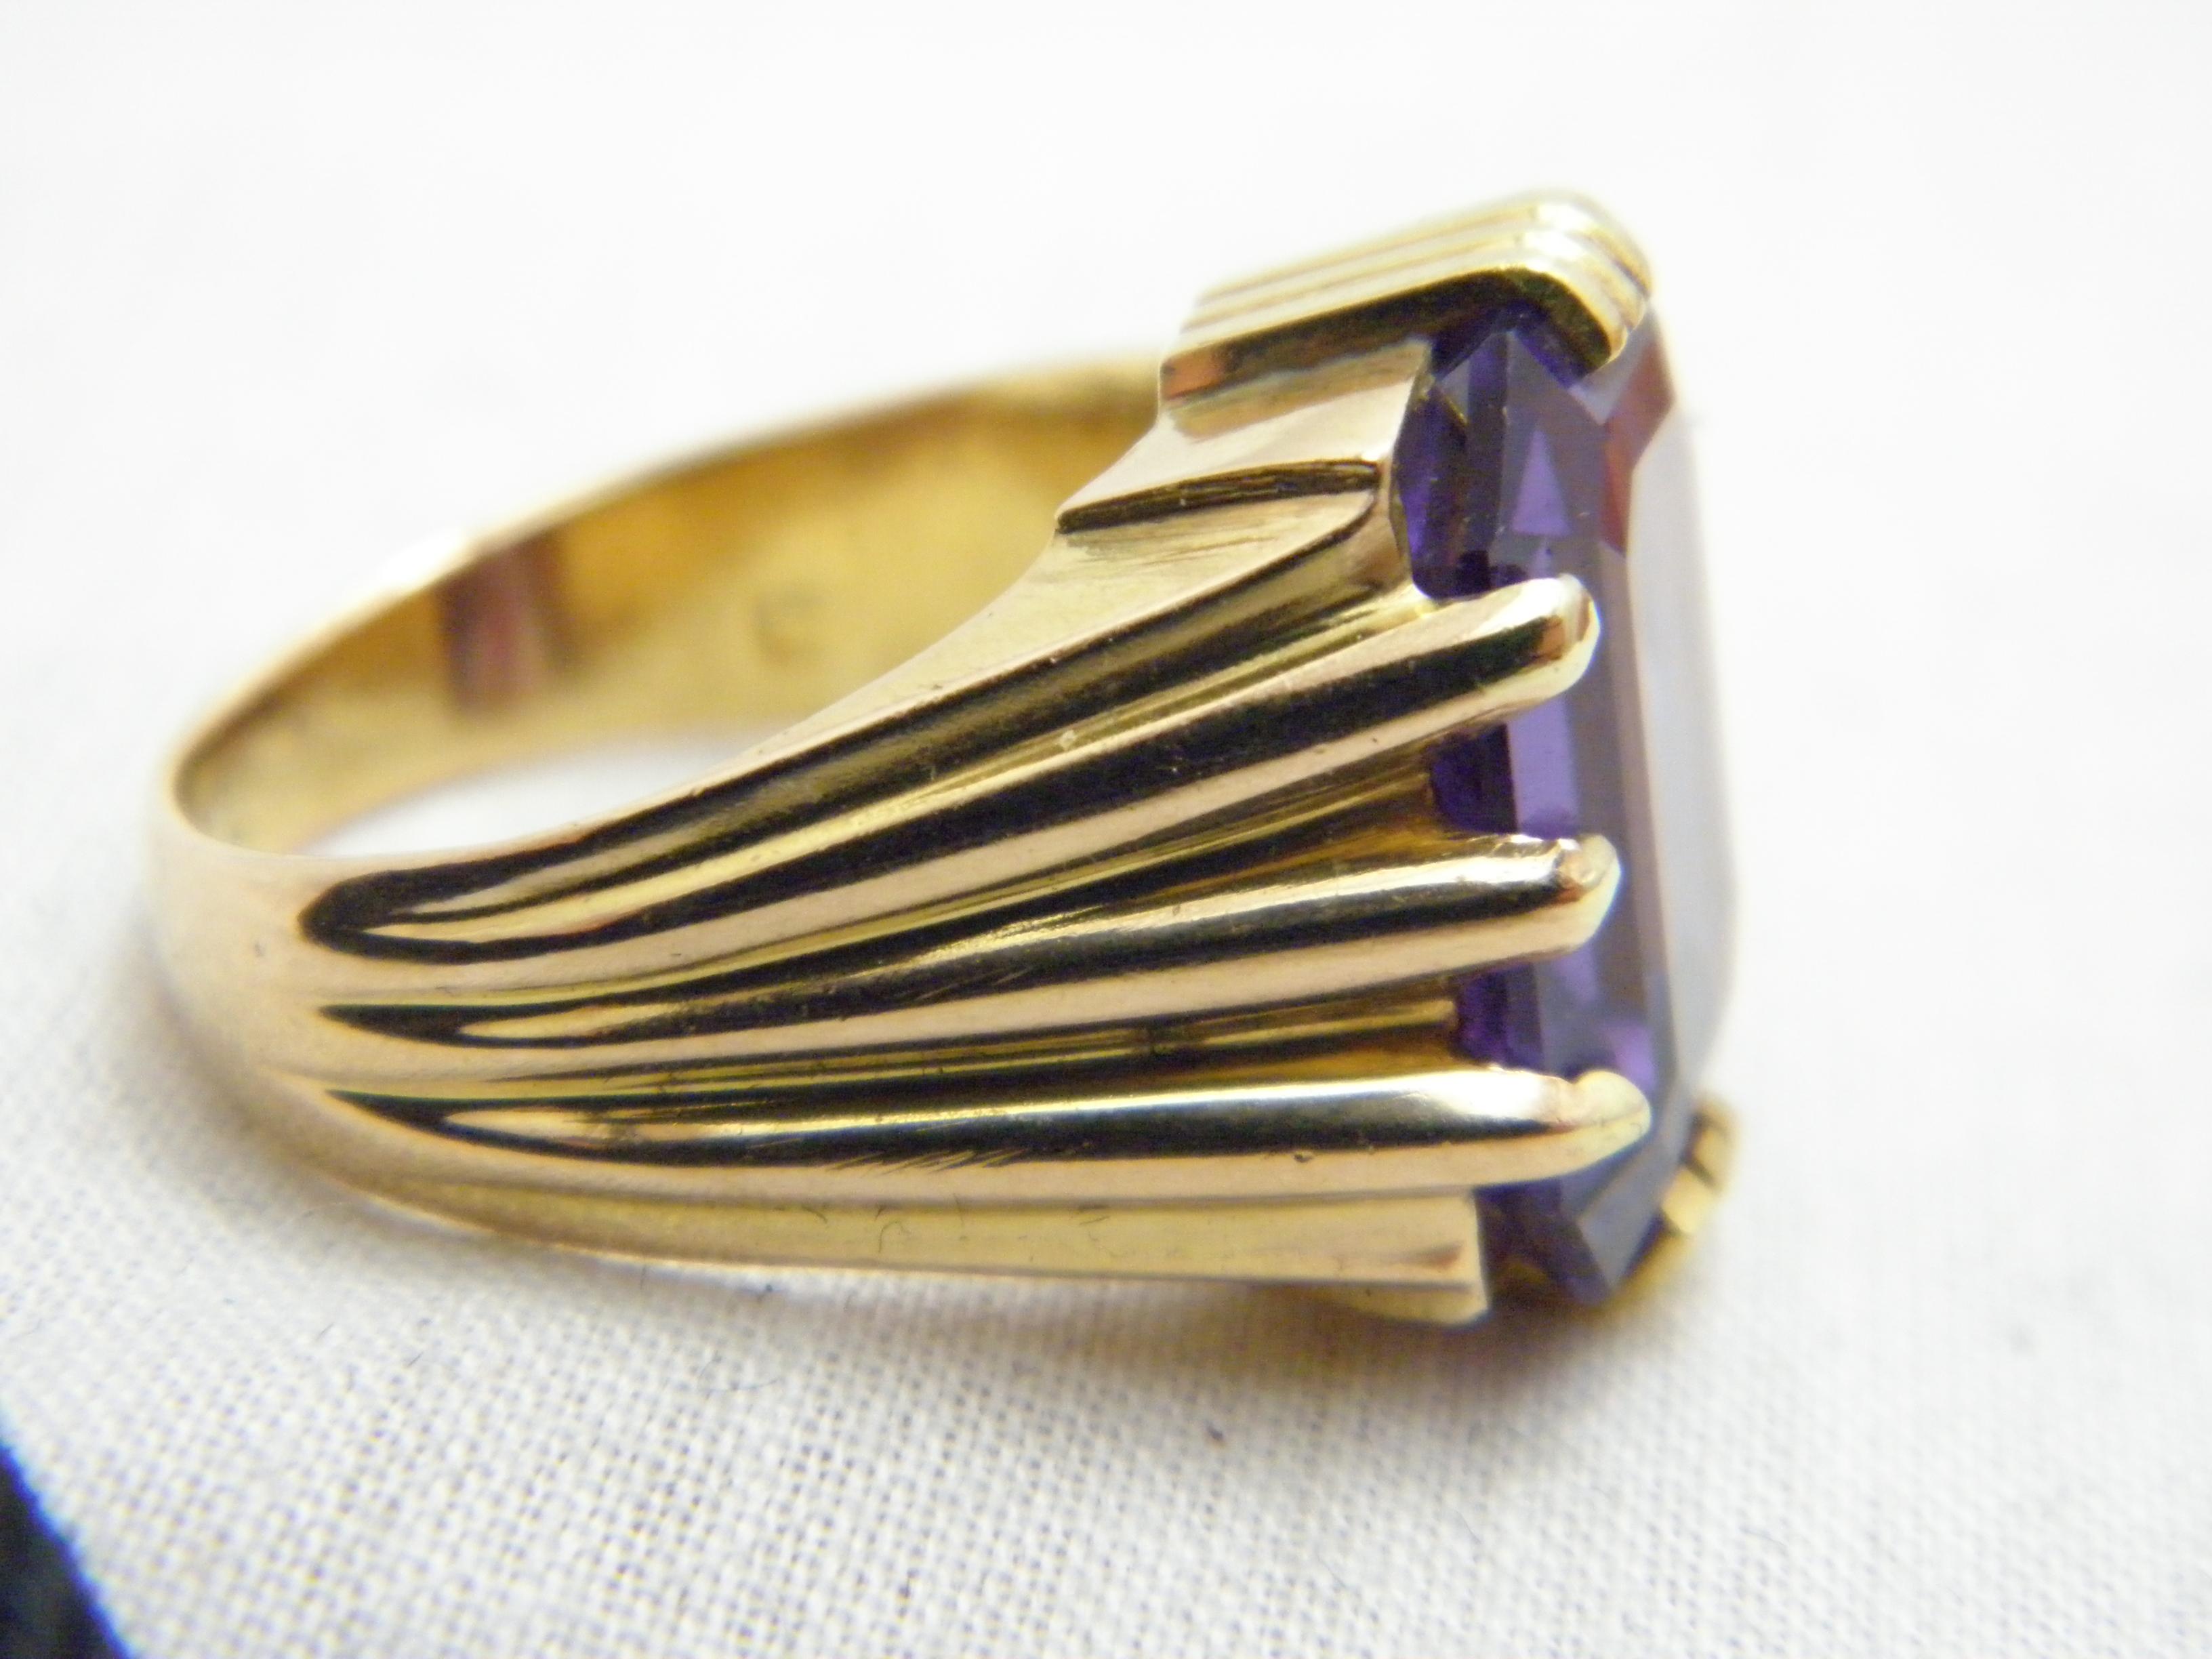 Women's or Men's Vintage Alexandrite 18ct Gold Statement Signet Ring Size P 7.75 750 Purity Heavy